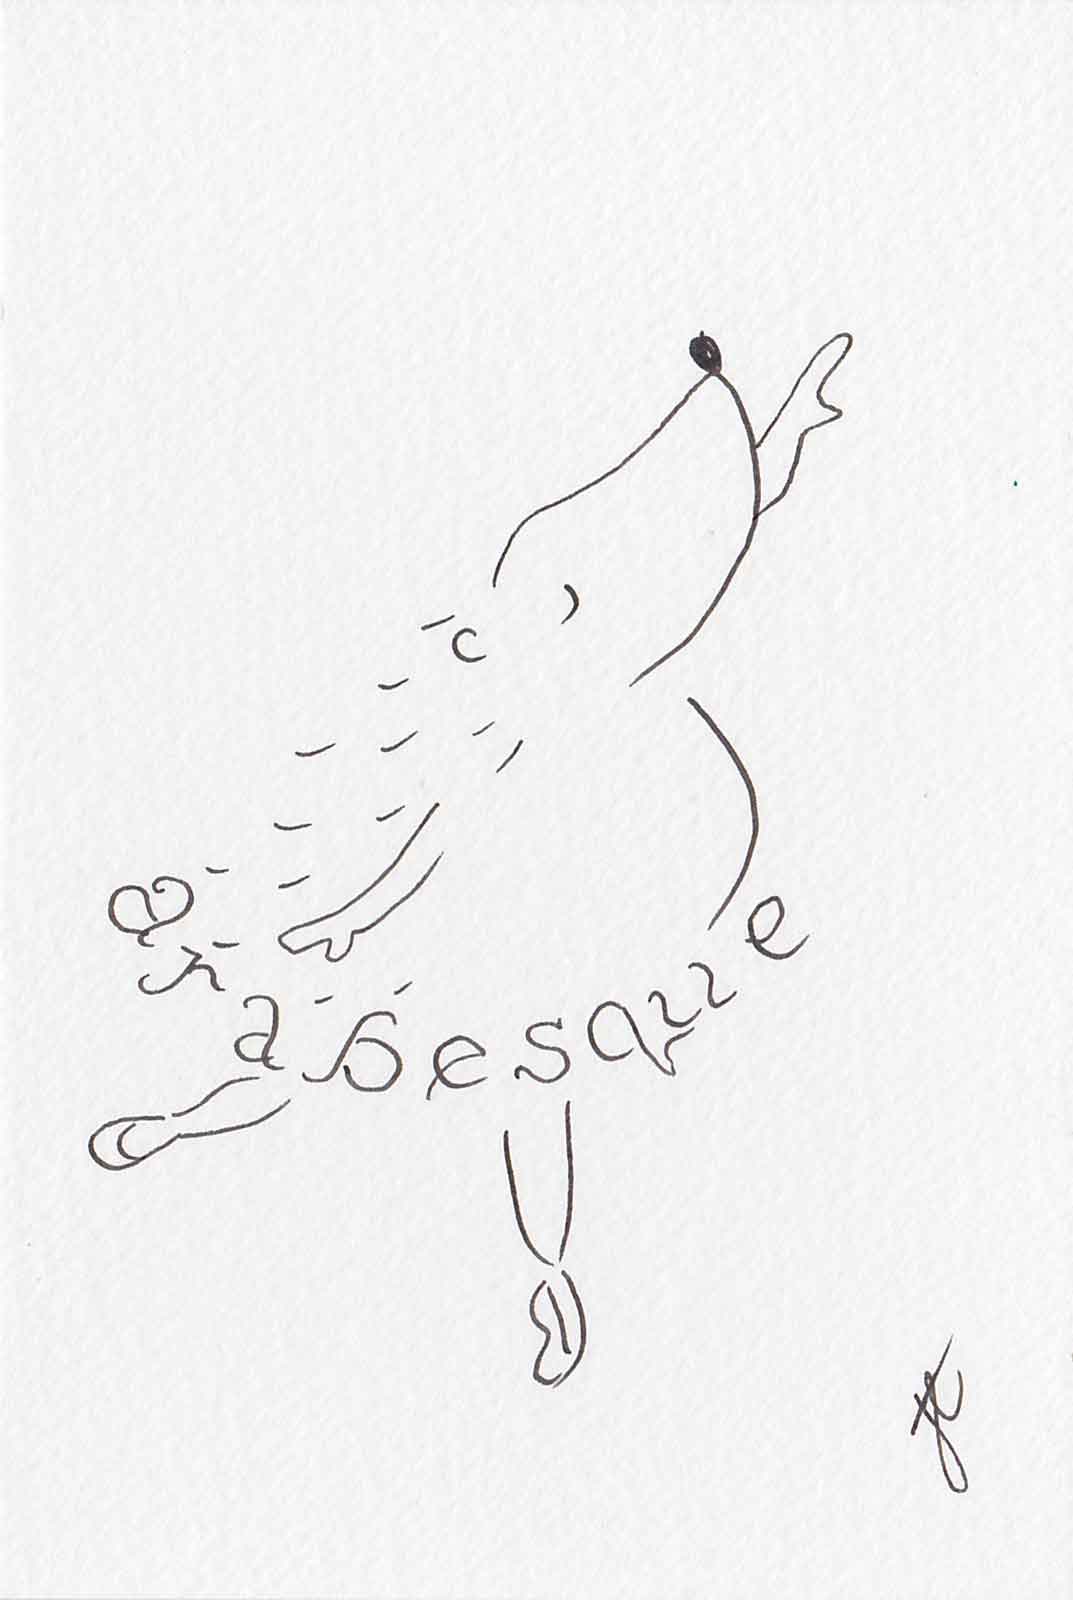 Hedgie ballettoons character in arabesque pose with handlettered arabesque tutu